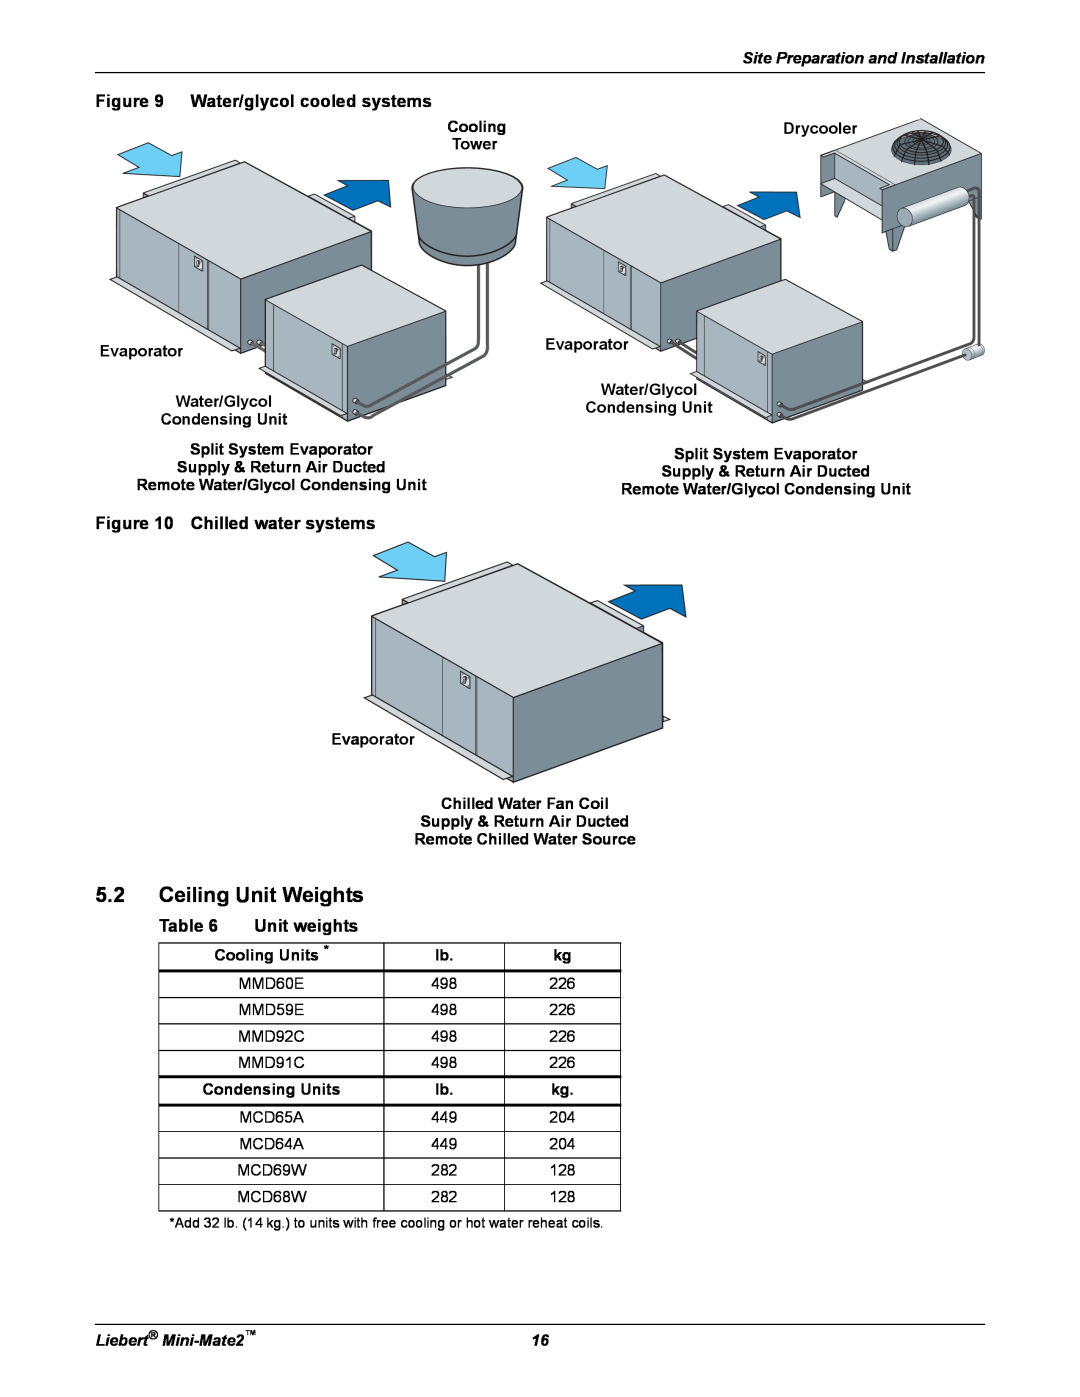 Emerson MINI-MATE2 user manual 5.2Ceiling Unit Weights, Water/glycol cooled systems, Chilled water systems, Unit weights 